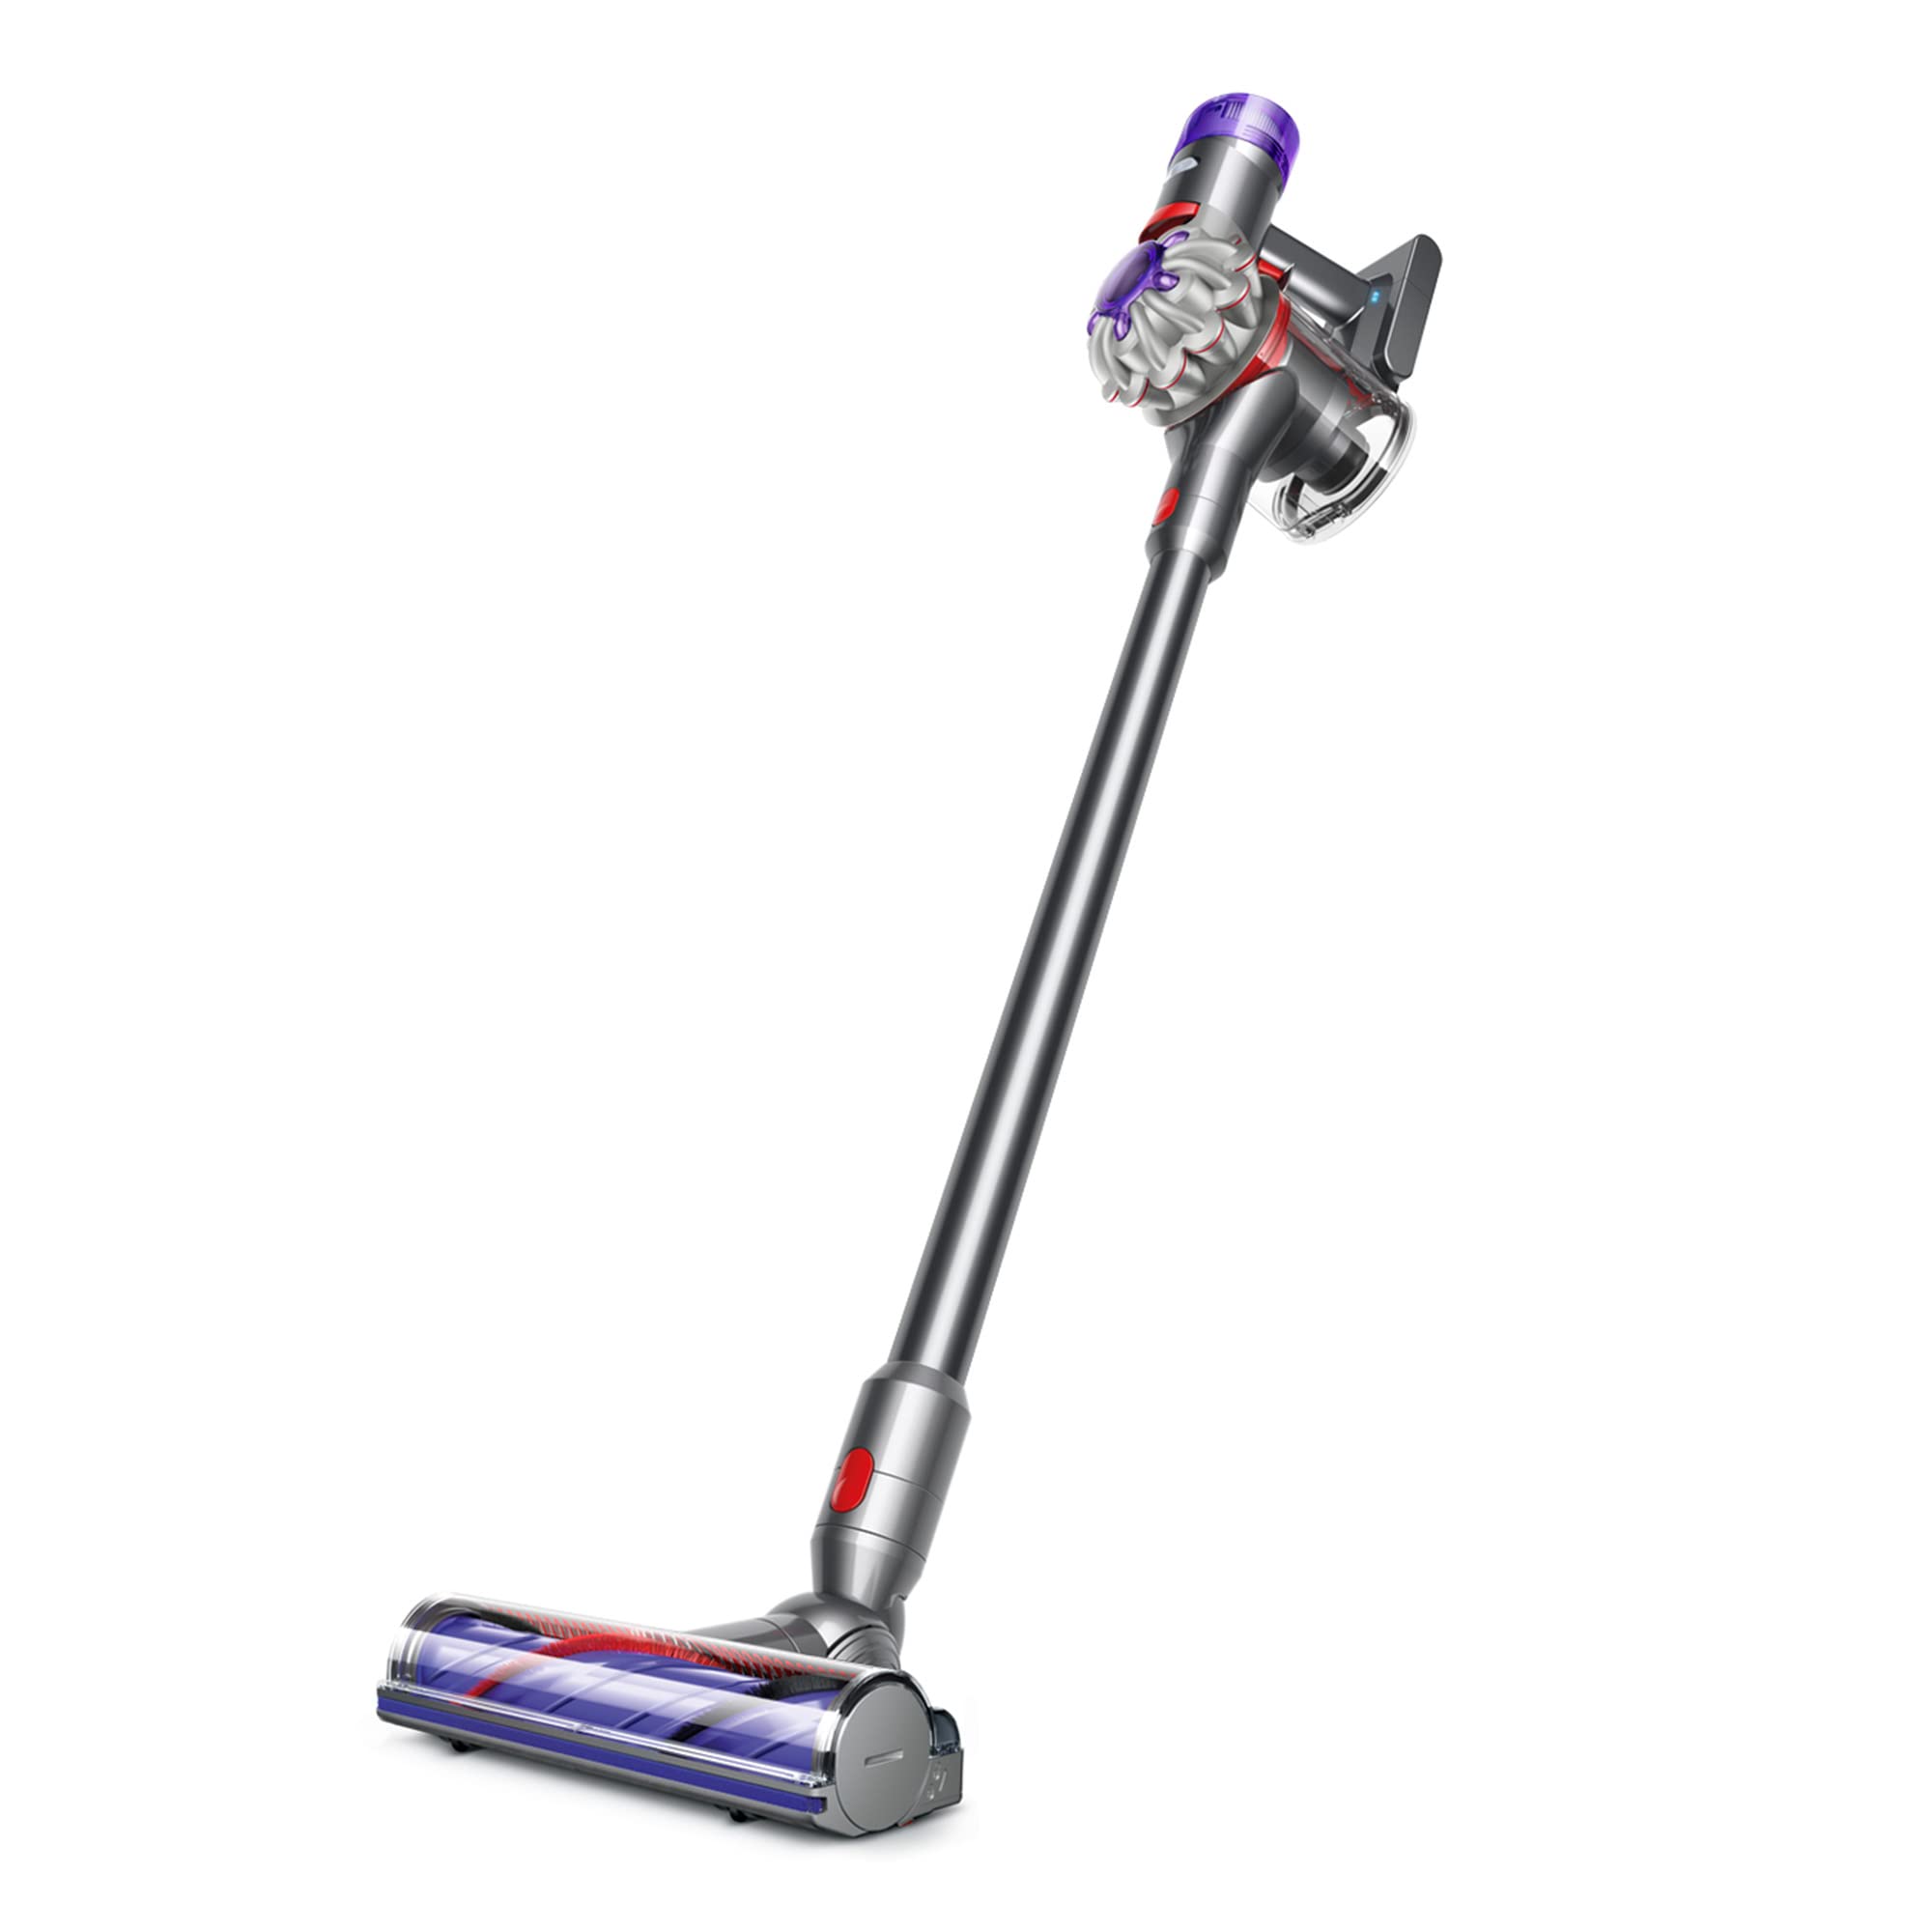 【Today's Special Price $37.99】 V8 Cordless Vacuum Cleaner, factory direct sale special price!